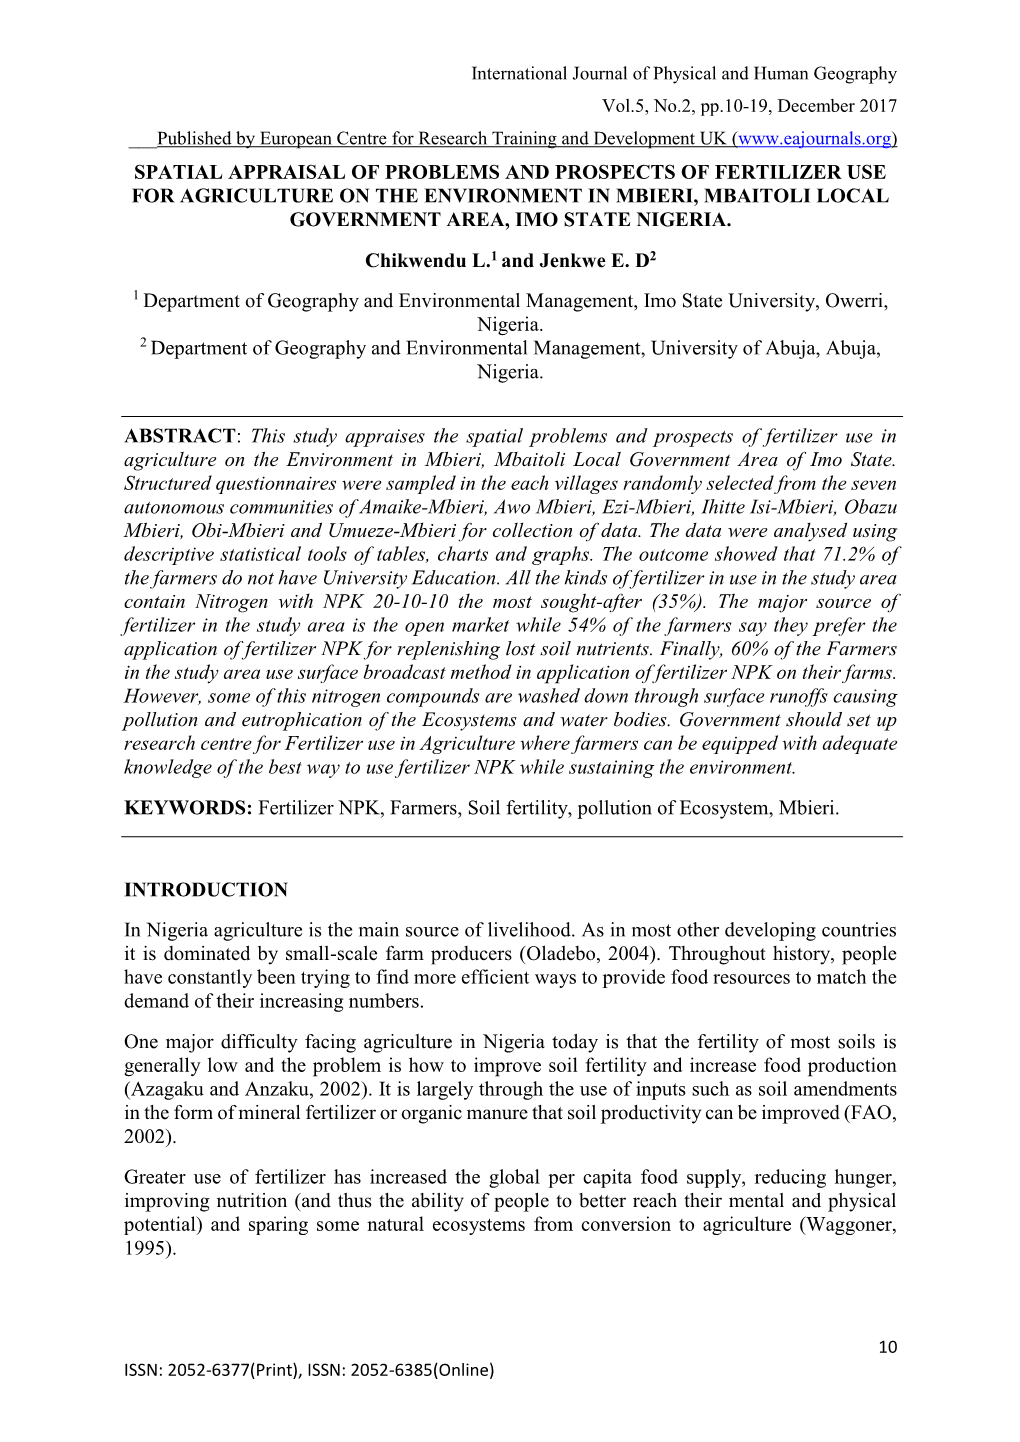 Spatial Appraisal of Problems and Prospects of Fertilizer Use for Agriculture on the Environment in Mbieri, Mbaitoli Local Government Area, Imo State Nigeria